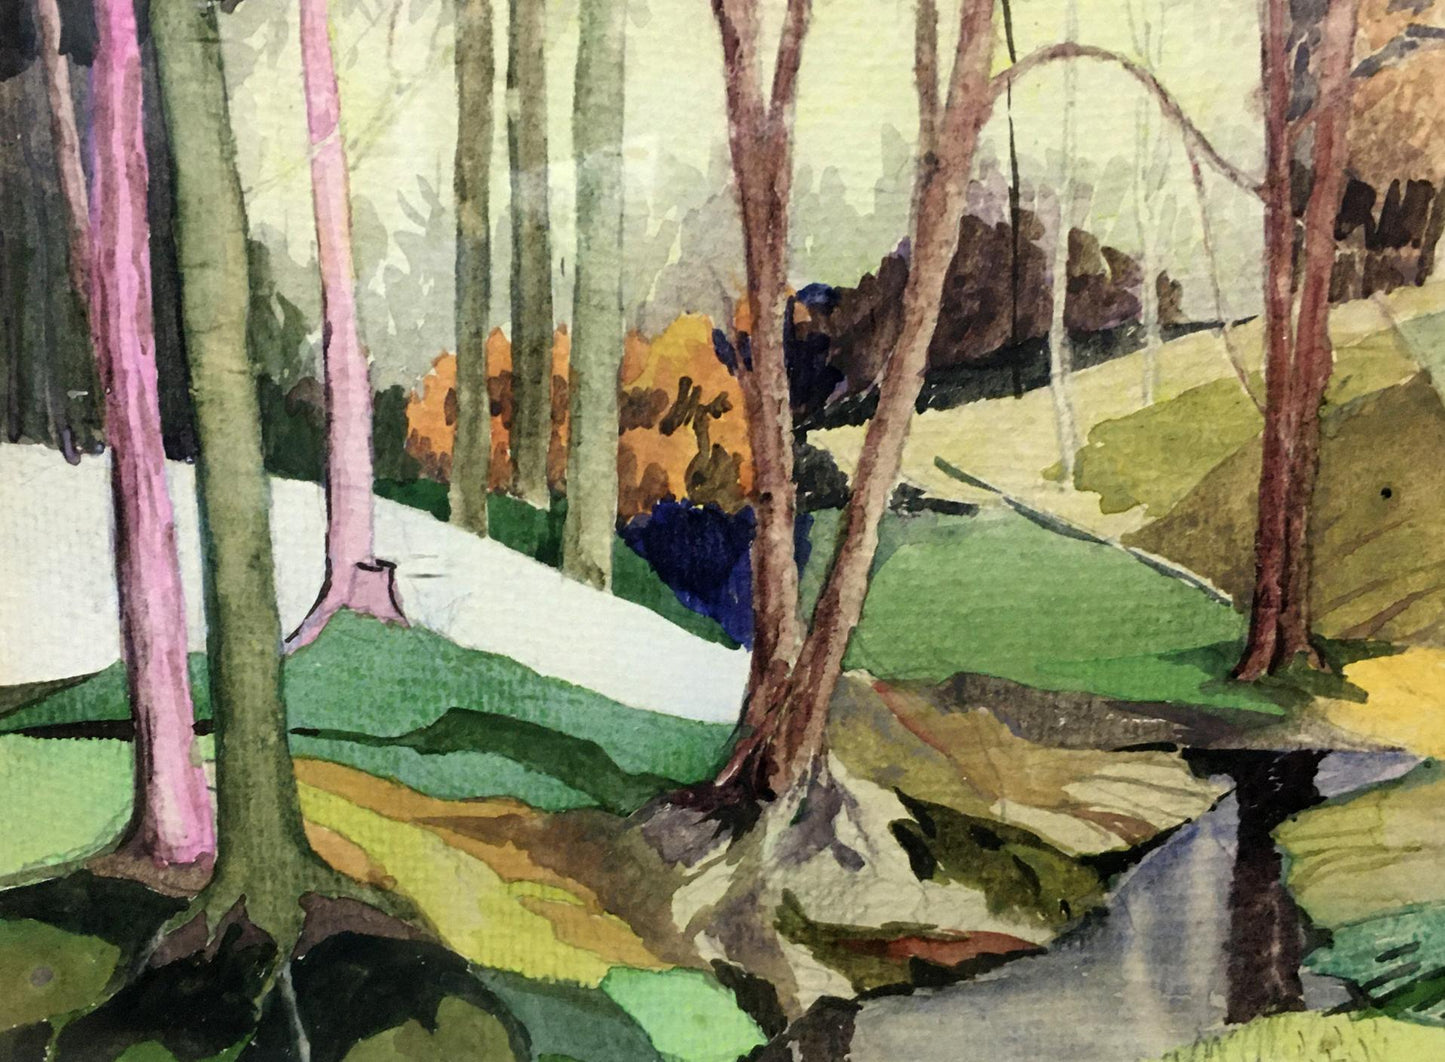 The beauty of a forest stream is captured in V. Olisevich's watercolor painting